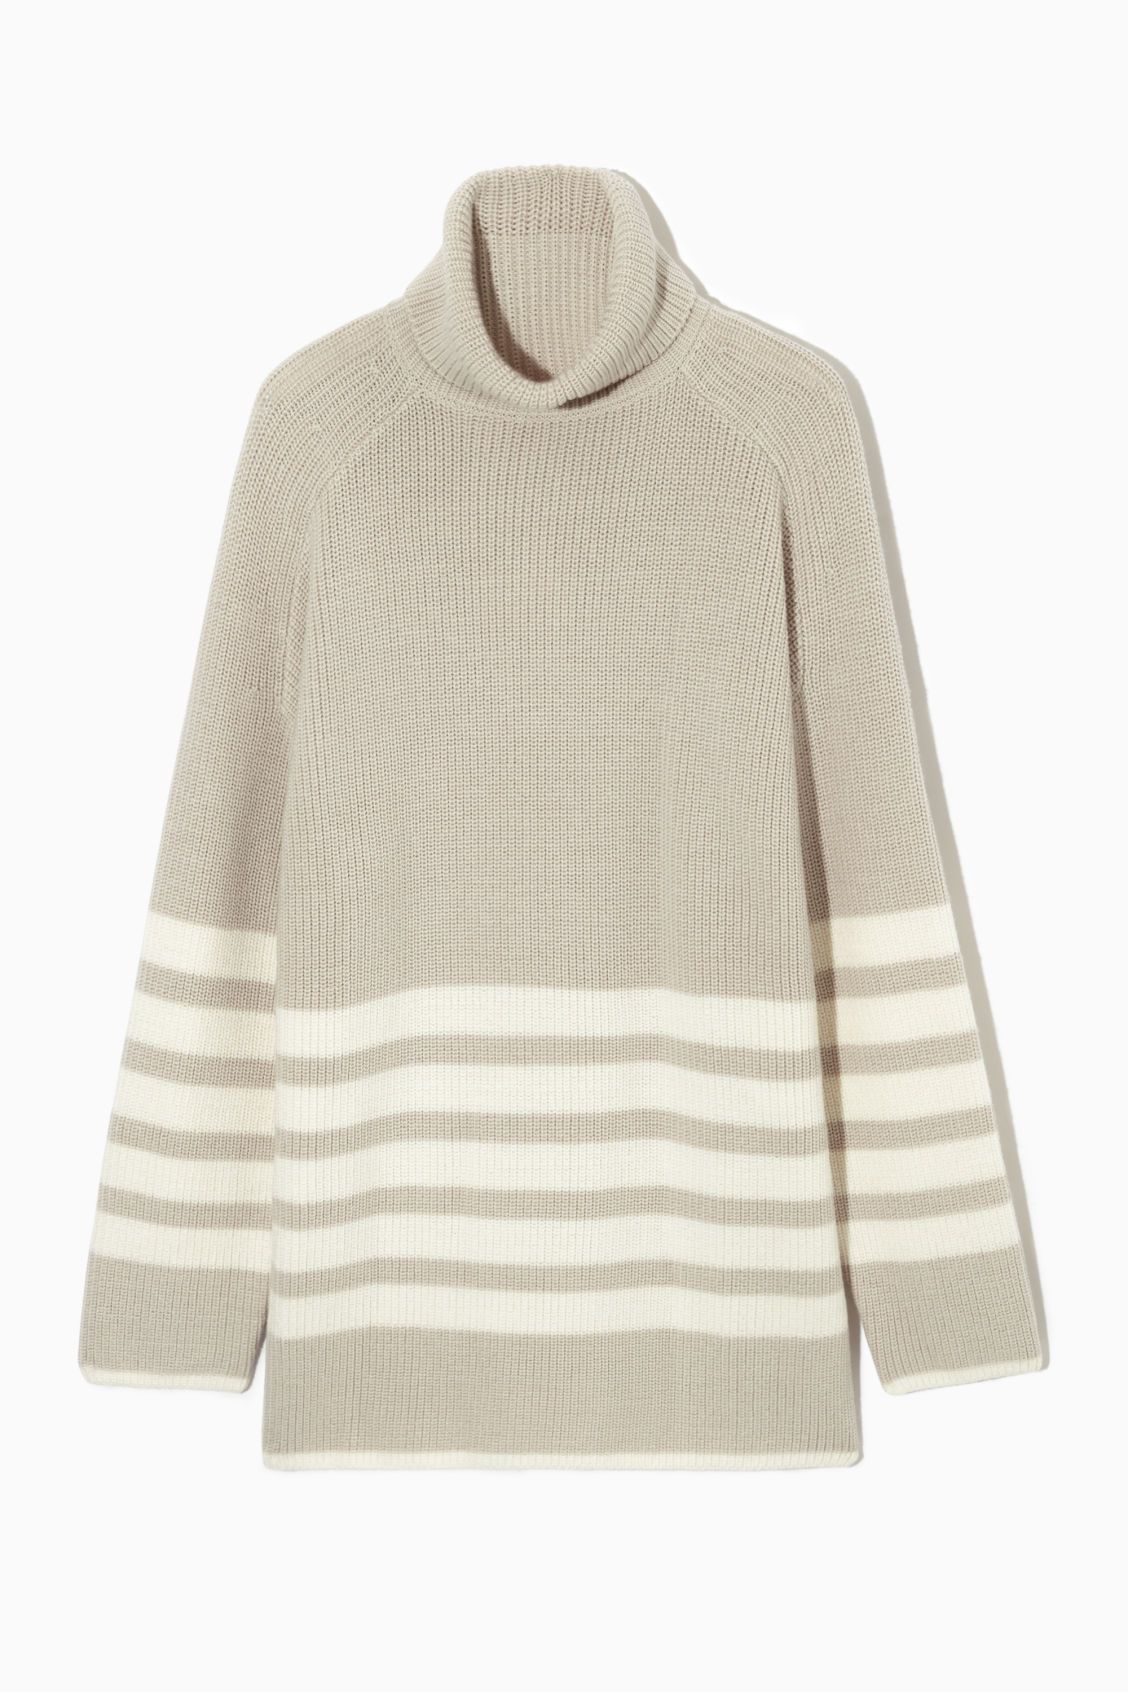 STRIPED ROLLNECK SWEATER - LIGHT BEIGE / WHITE - Jumpers - COS | COS (US)